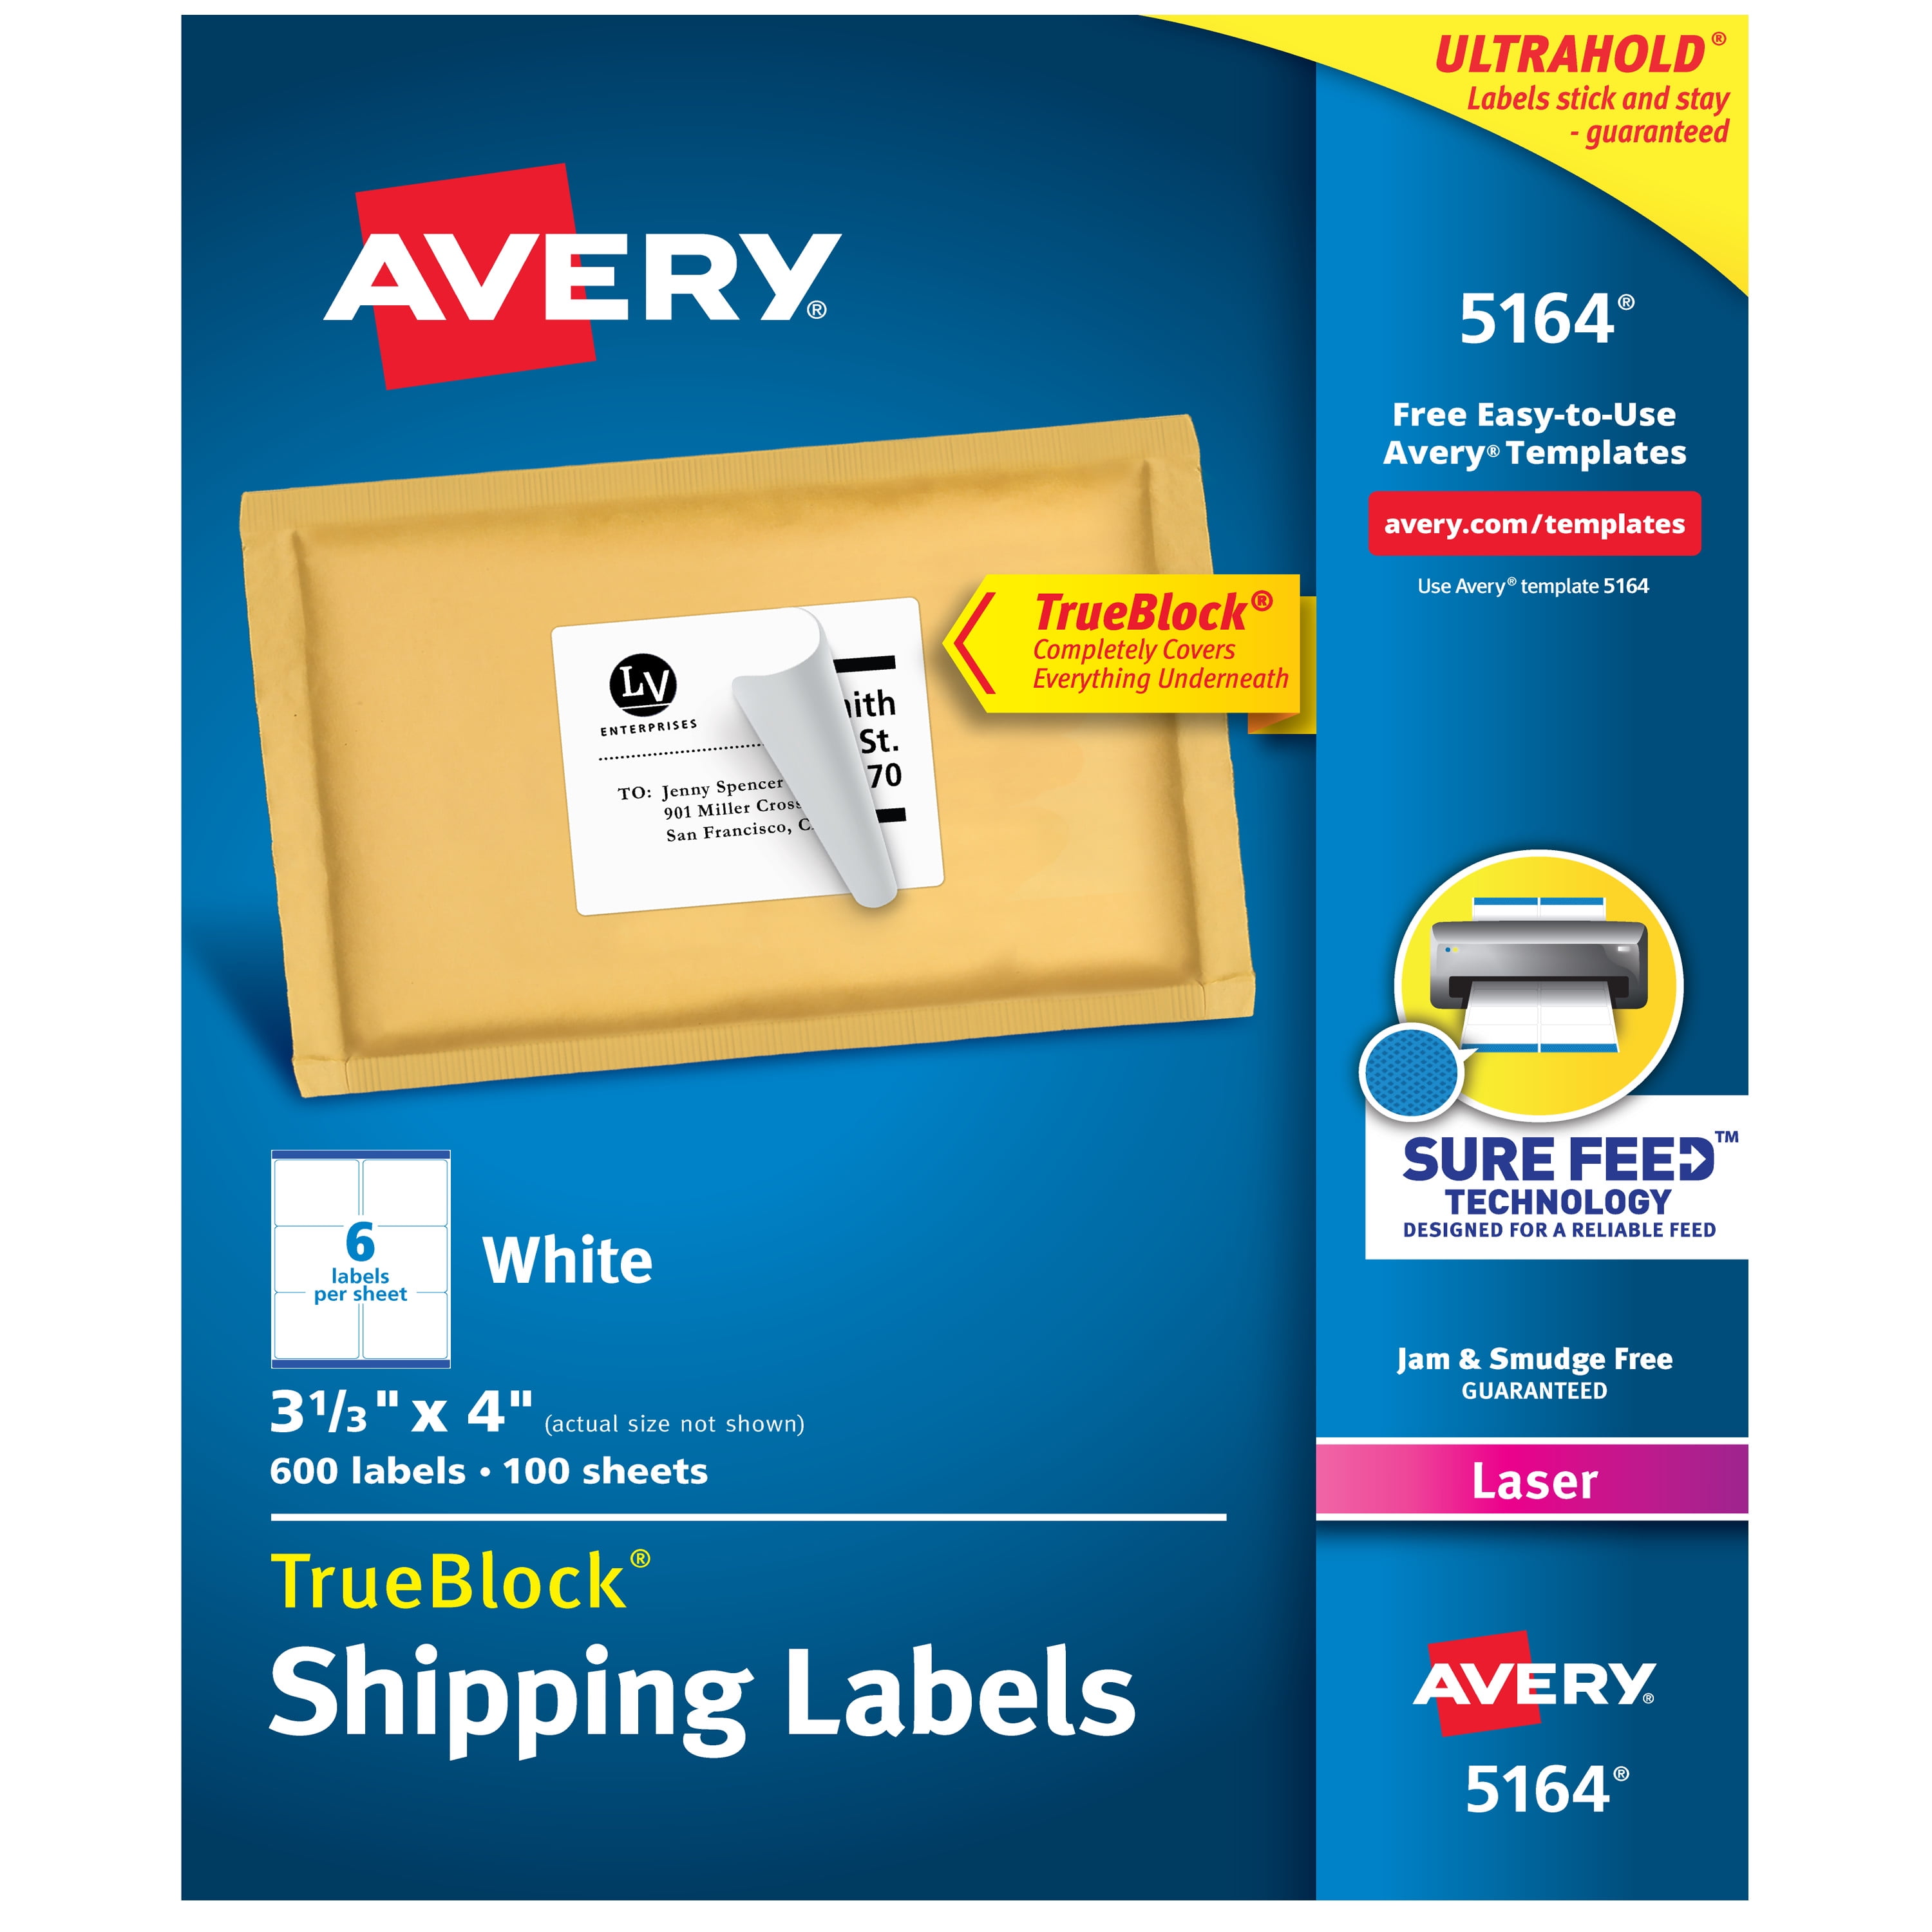 600 SHEETS OF PRINTER ADDRESS LABELS 24 PER PAGE